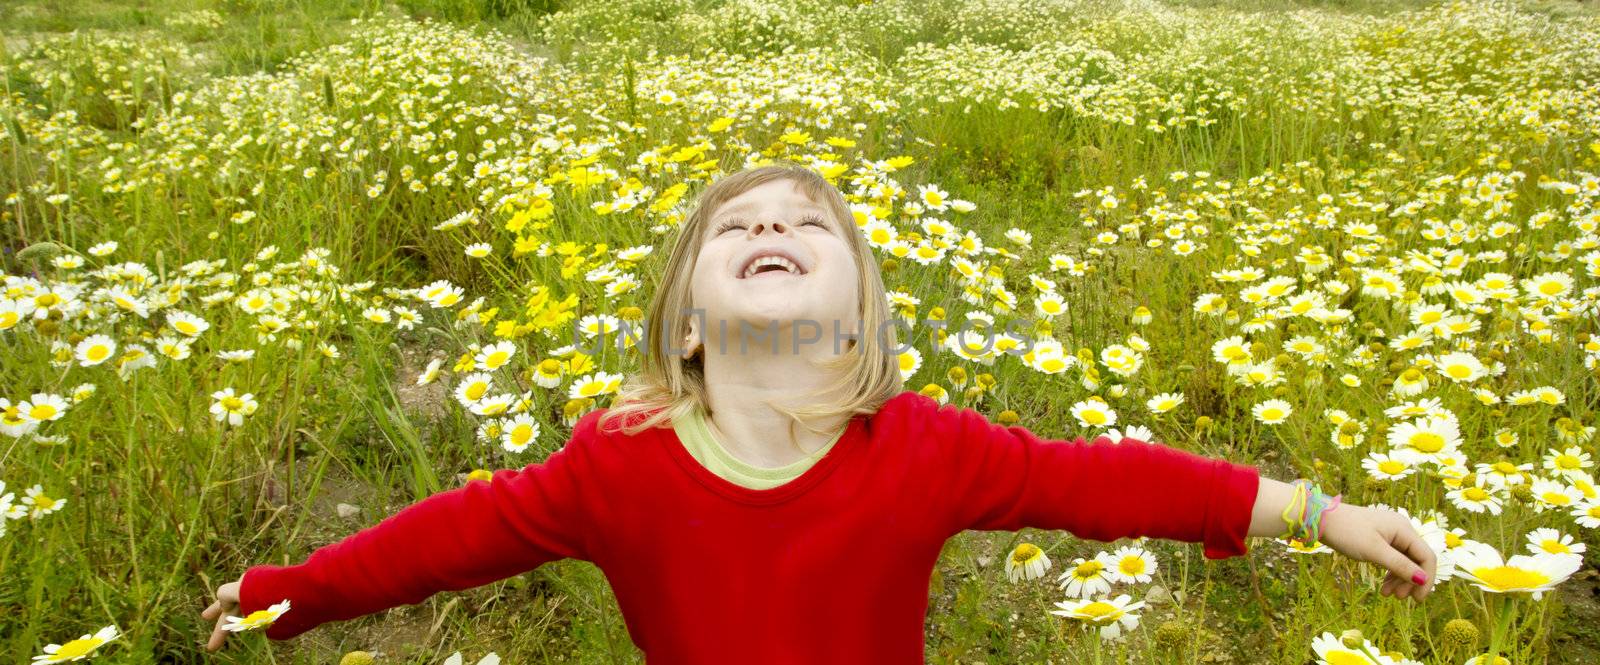 blond children girl open arms spring meadow daisy yellow flowers